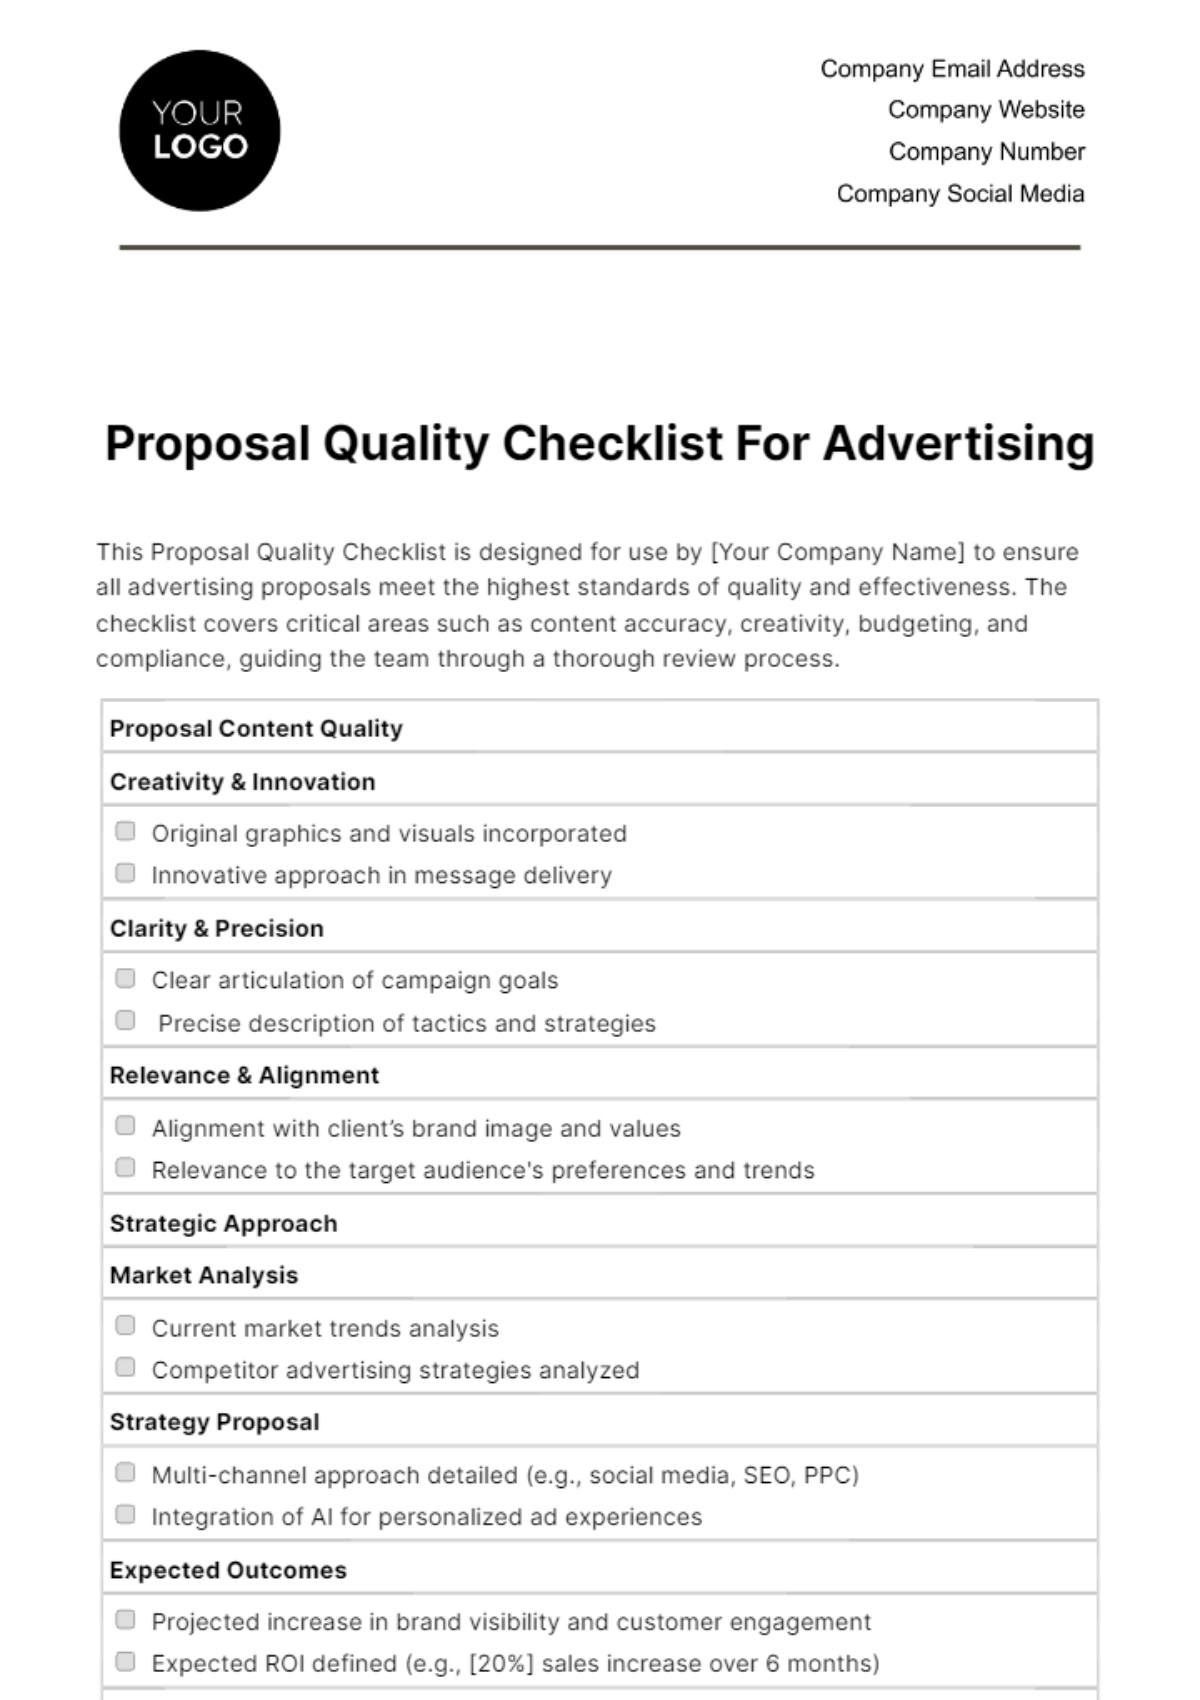 Free Proposal Quality Checklist for Advertising Template